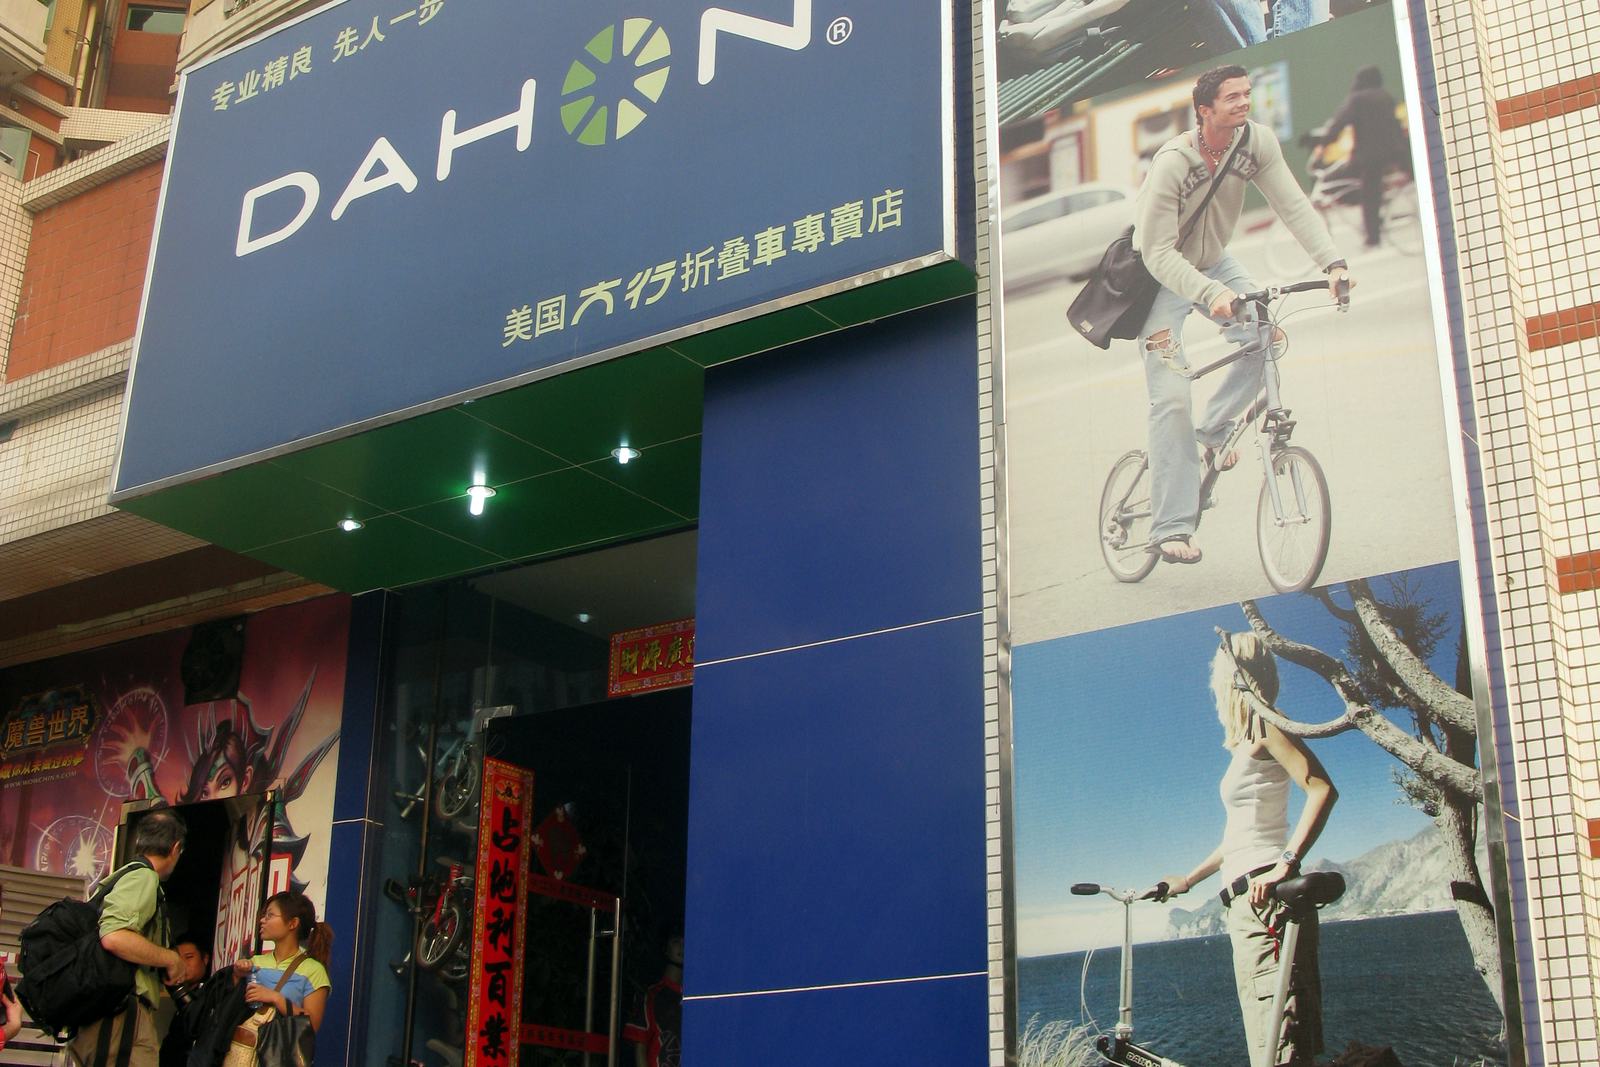 In their expansive reach, with over a thousand dedicated brand shops across 400 cities on the Chinese mainland alone, Dahon is offering a selection of market-specific aftermarket items.